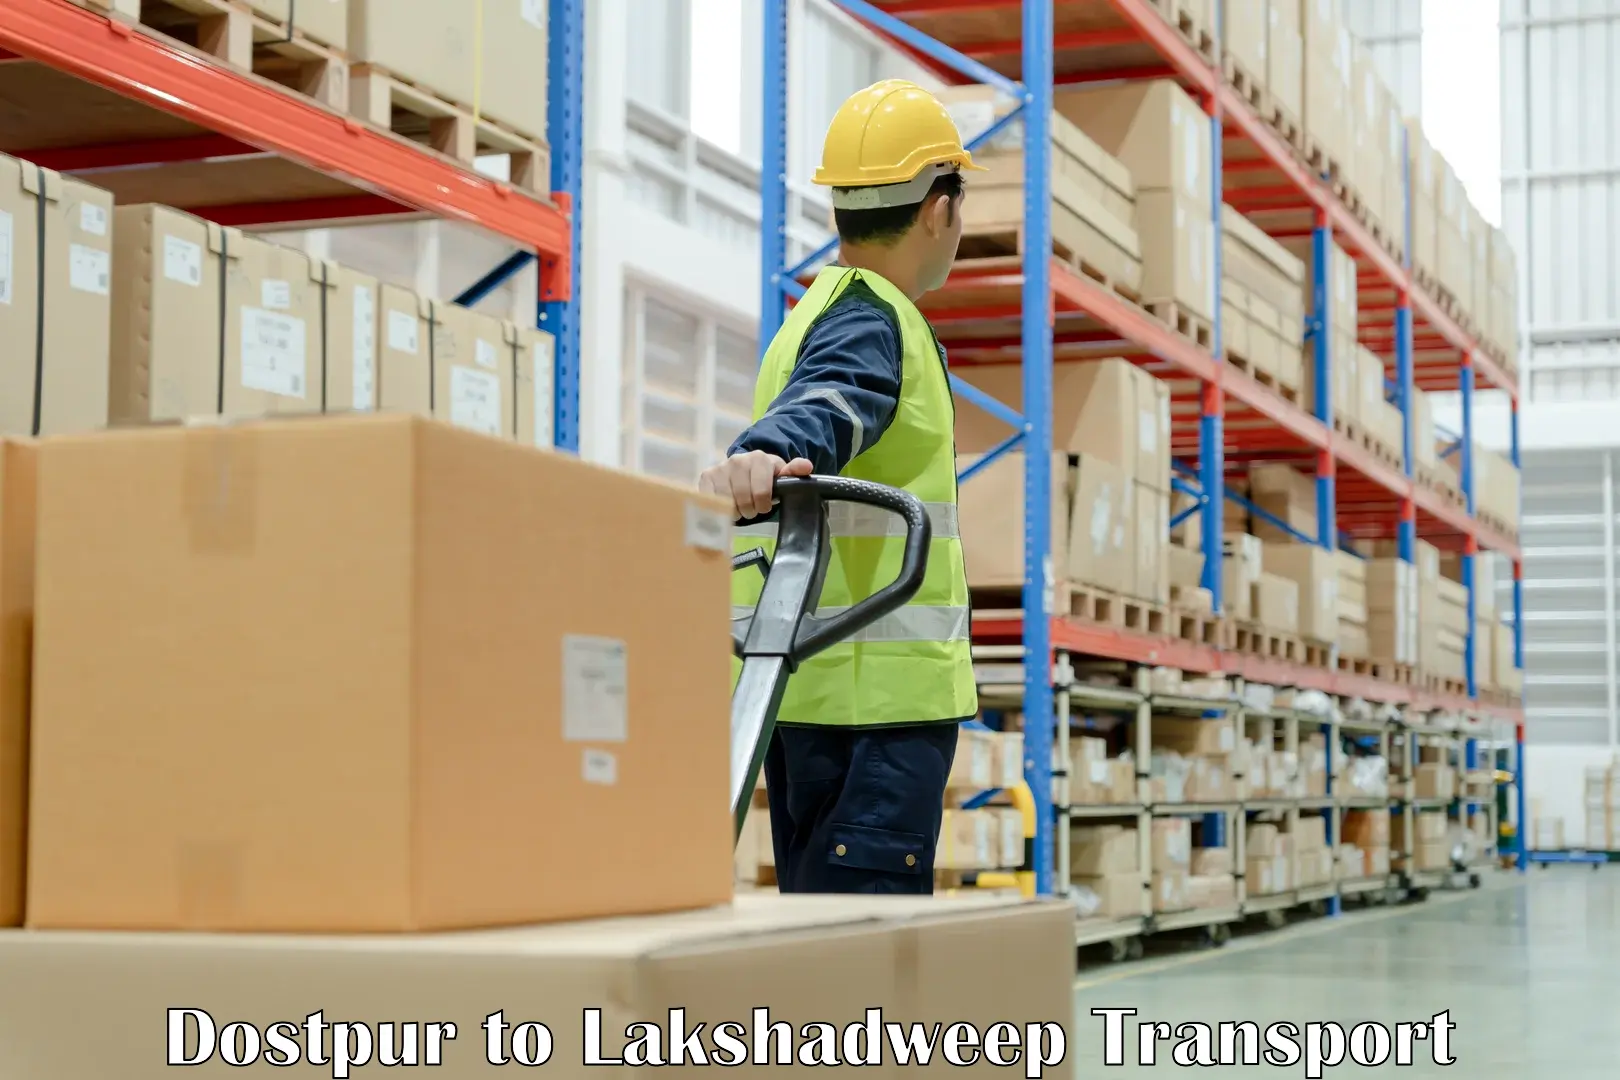 Domestic goods transportation services Dostpur to Lakshadweep